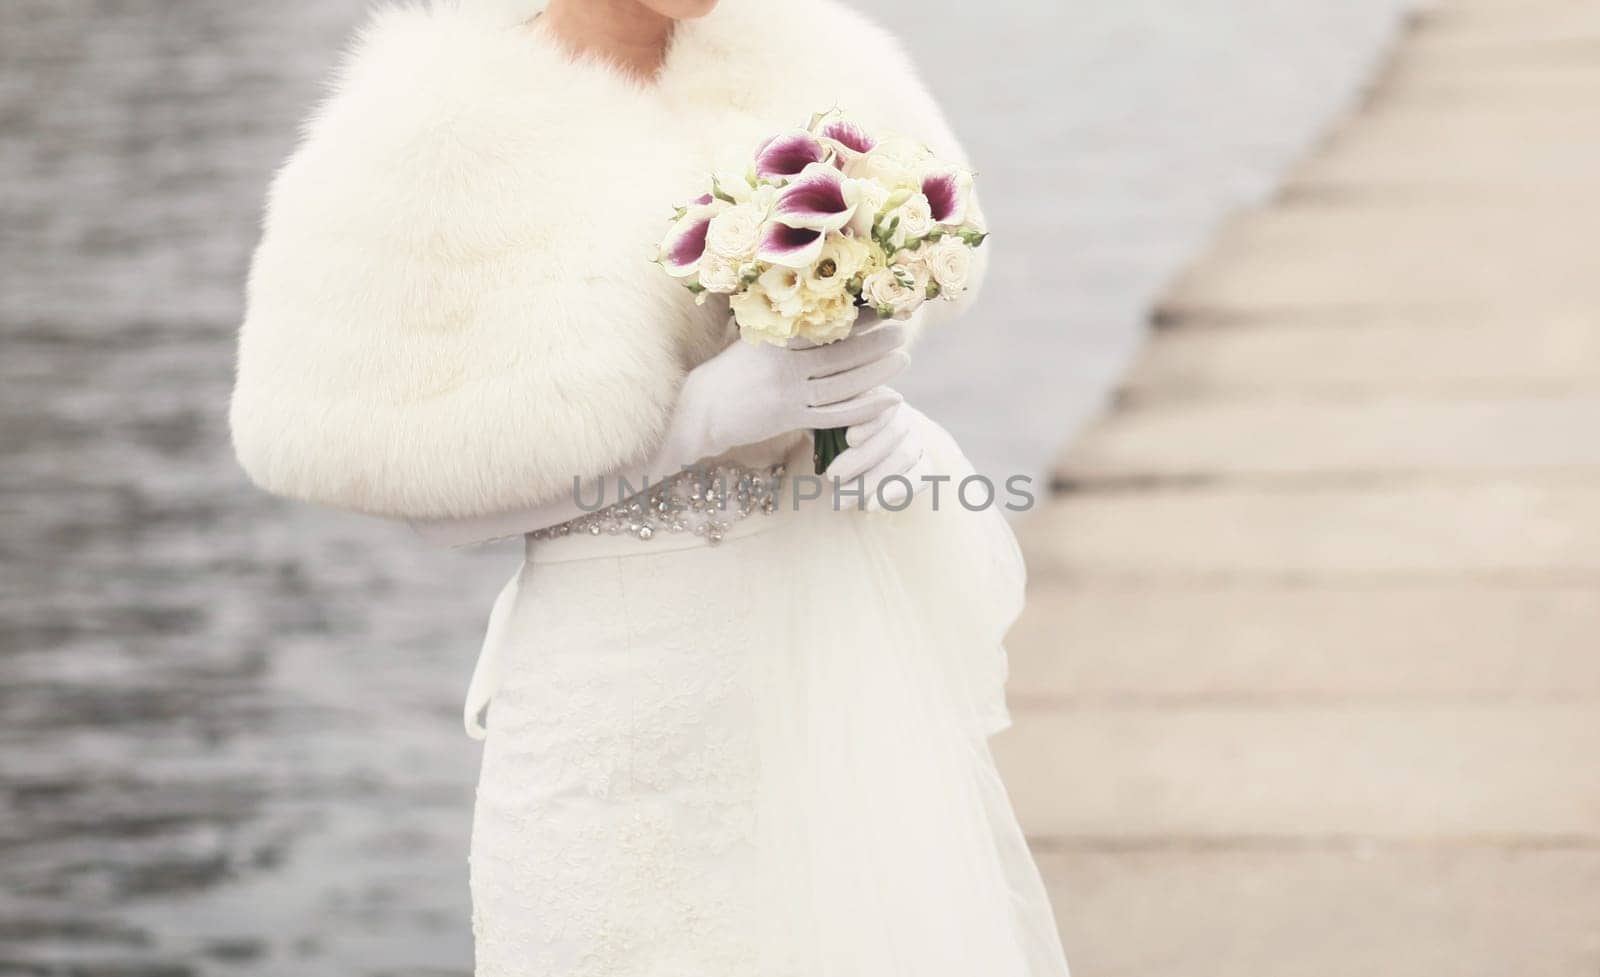 Beautiful wedding bouquet in the hands of the bride outdoors